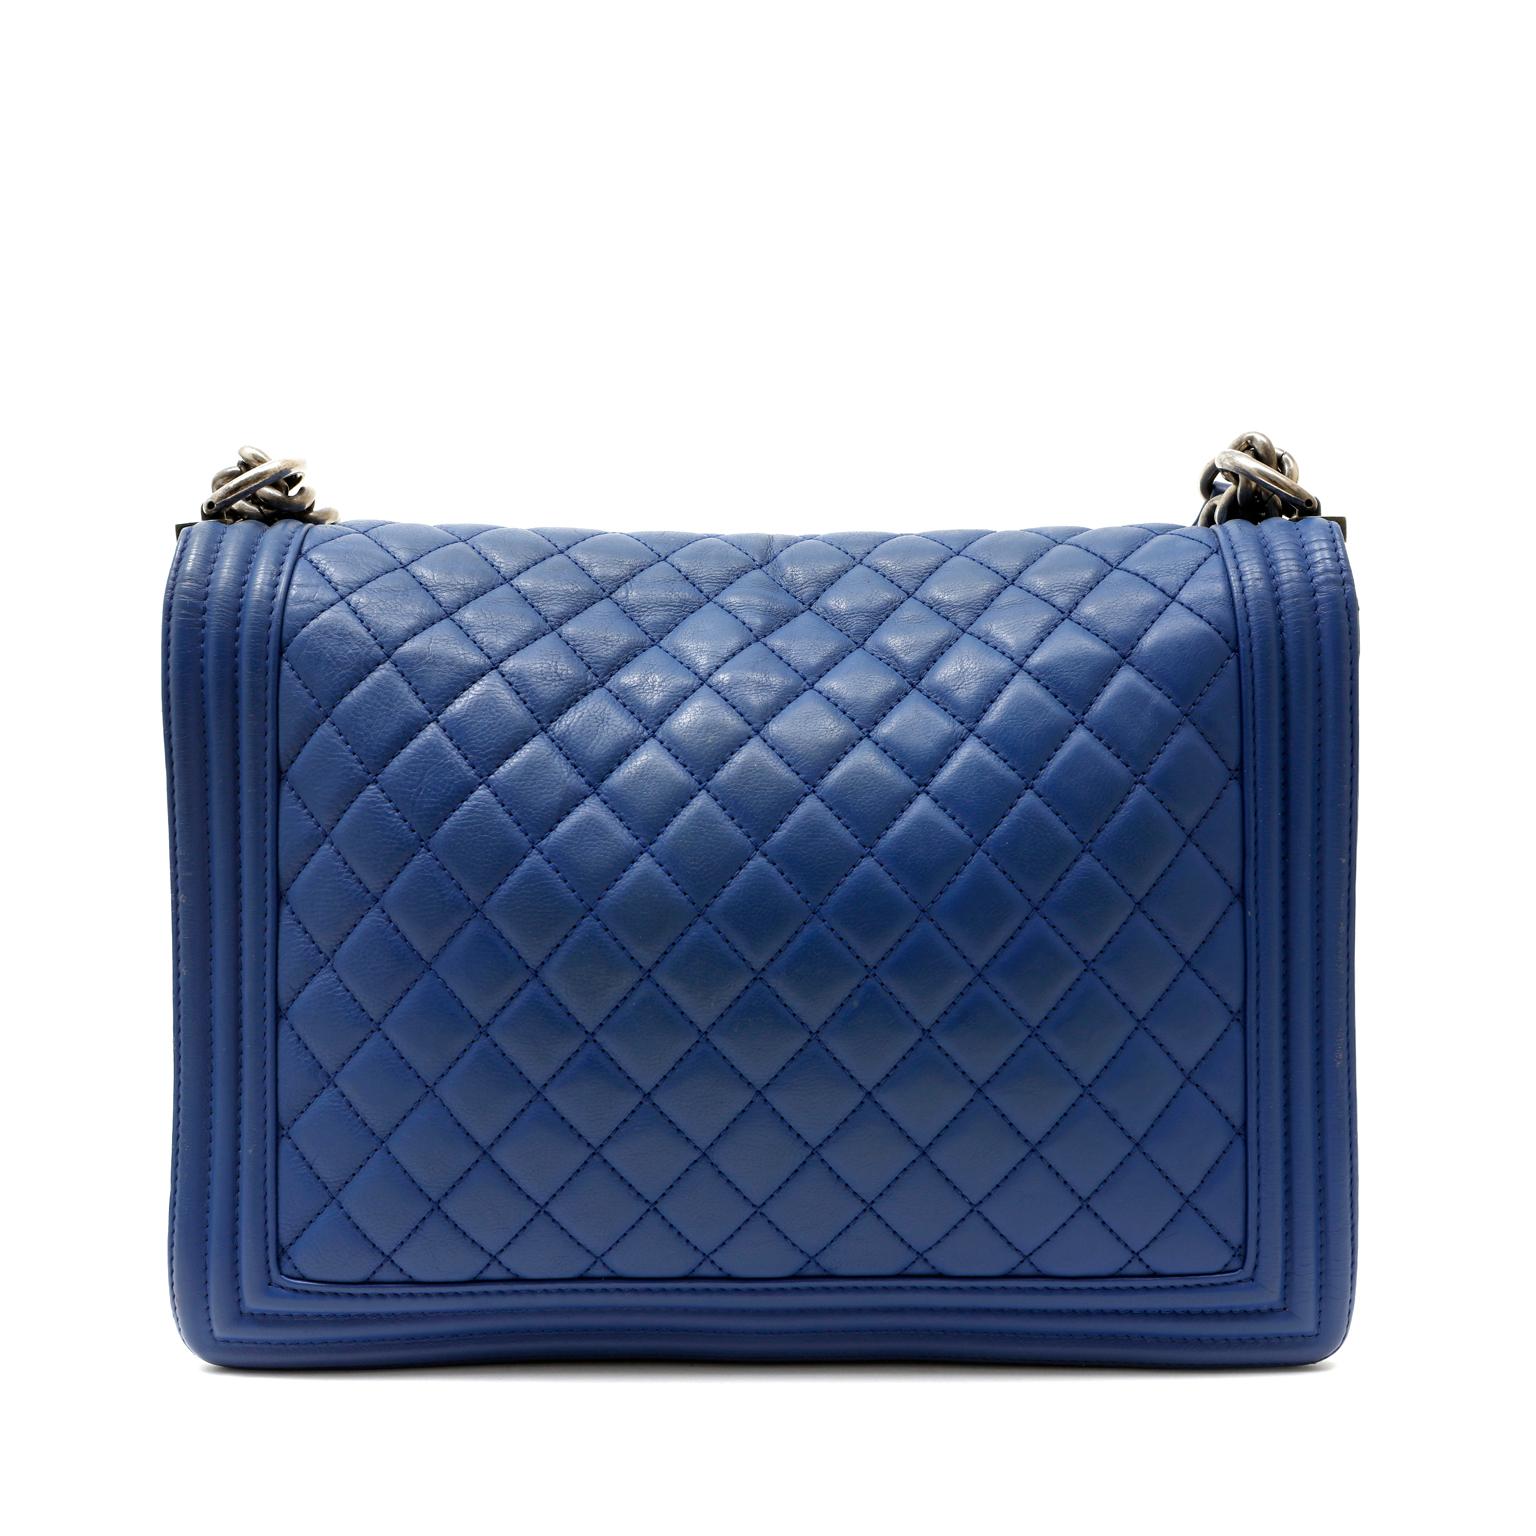 This authentic Chanel Blue Leather Large Boy Bag is in pristine condition.   Bold blue leather is quilted in signature Chanel diamond pattern with triple welt framed edges.  Signature Boy Bag CC plaque closure in edgy ruthenium hardware. Ruthenium